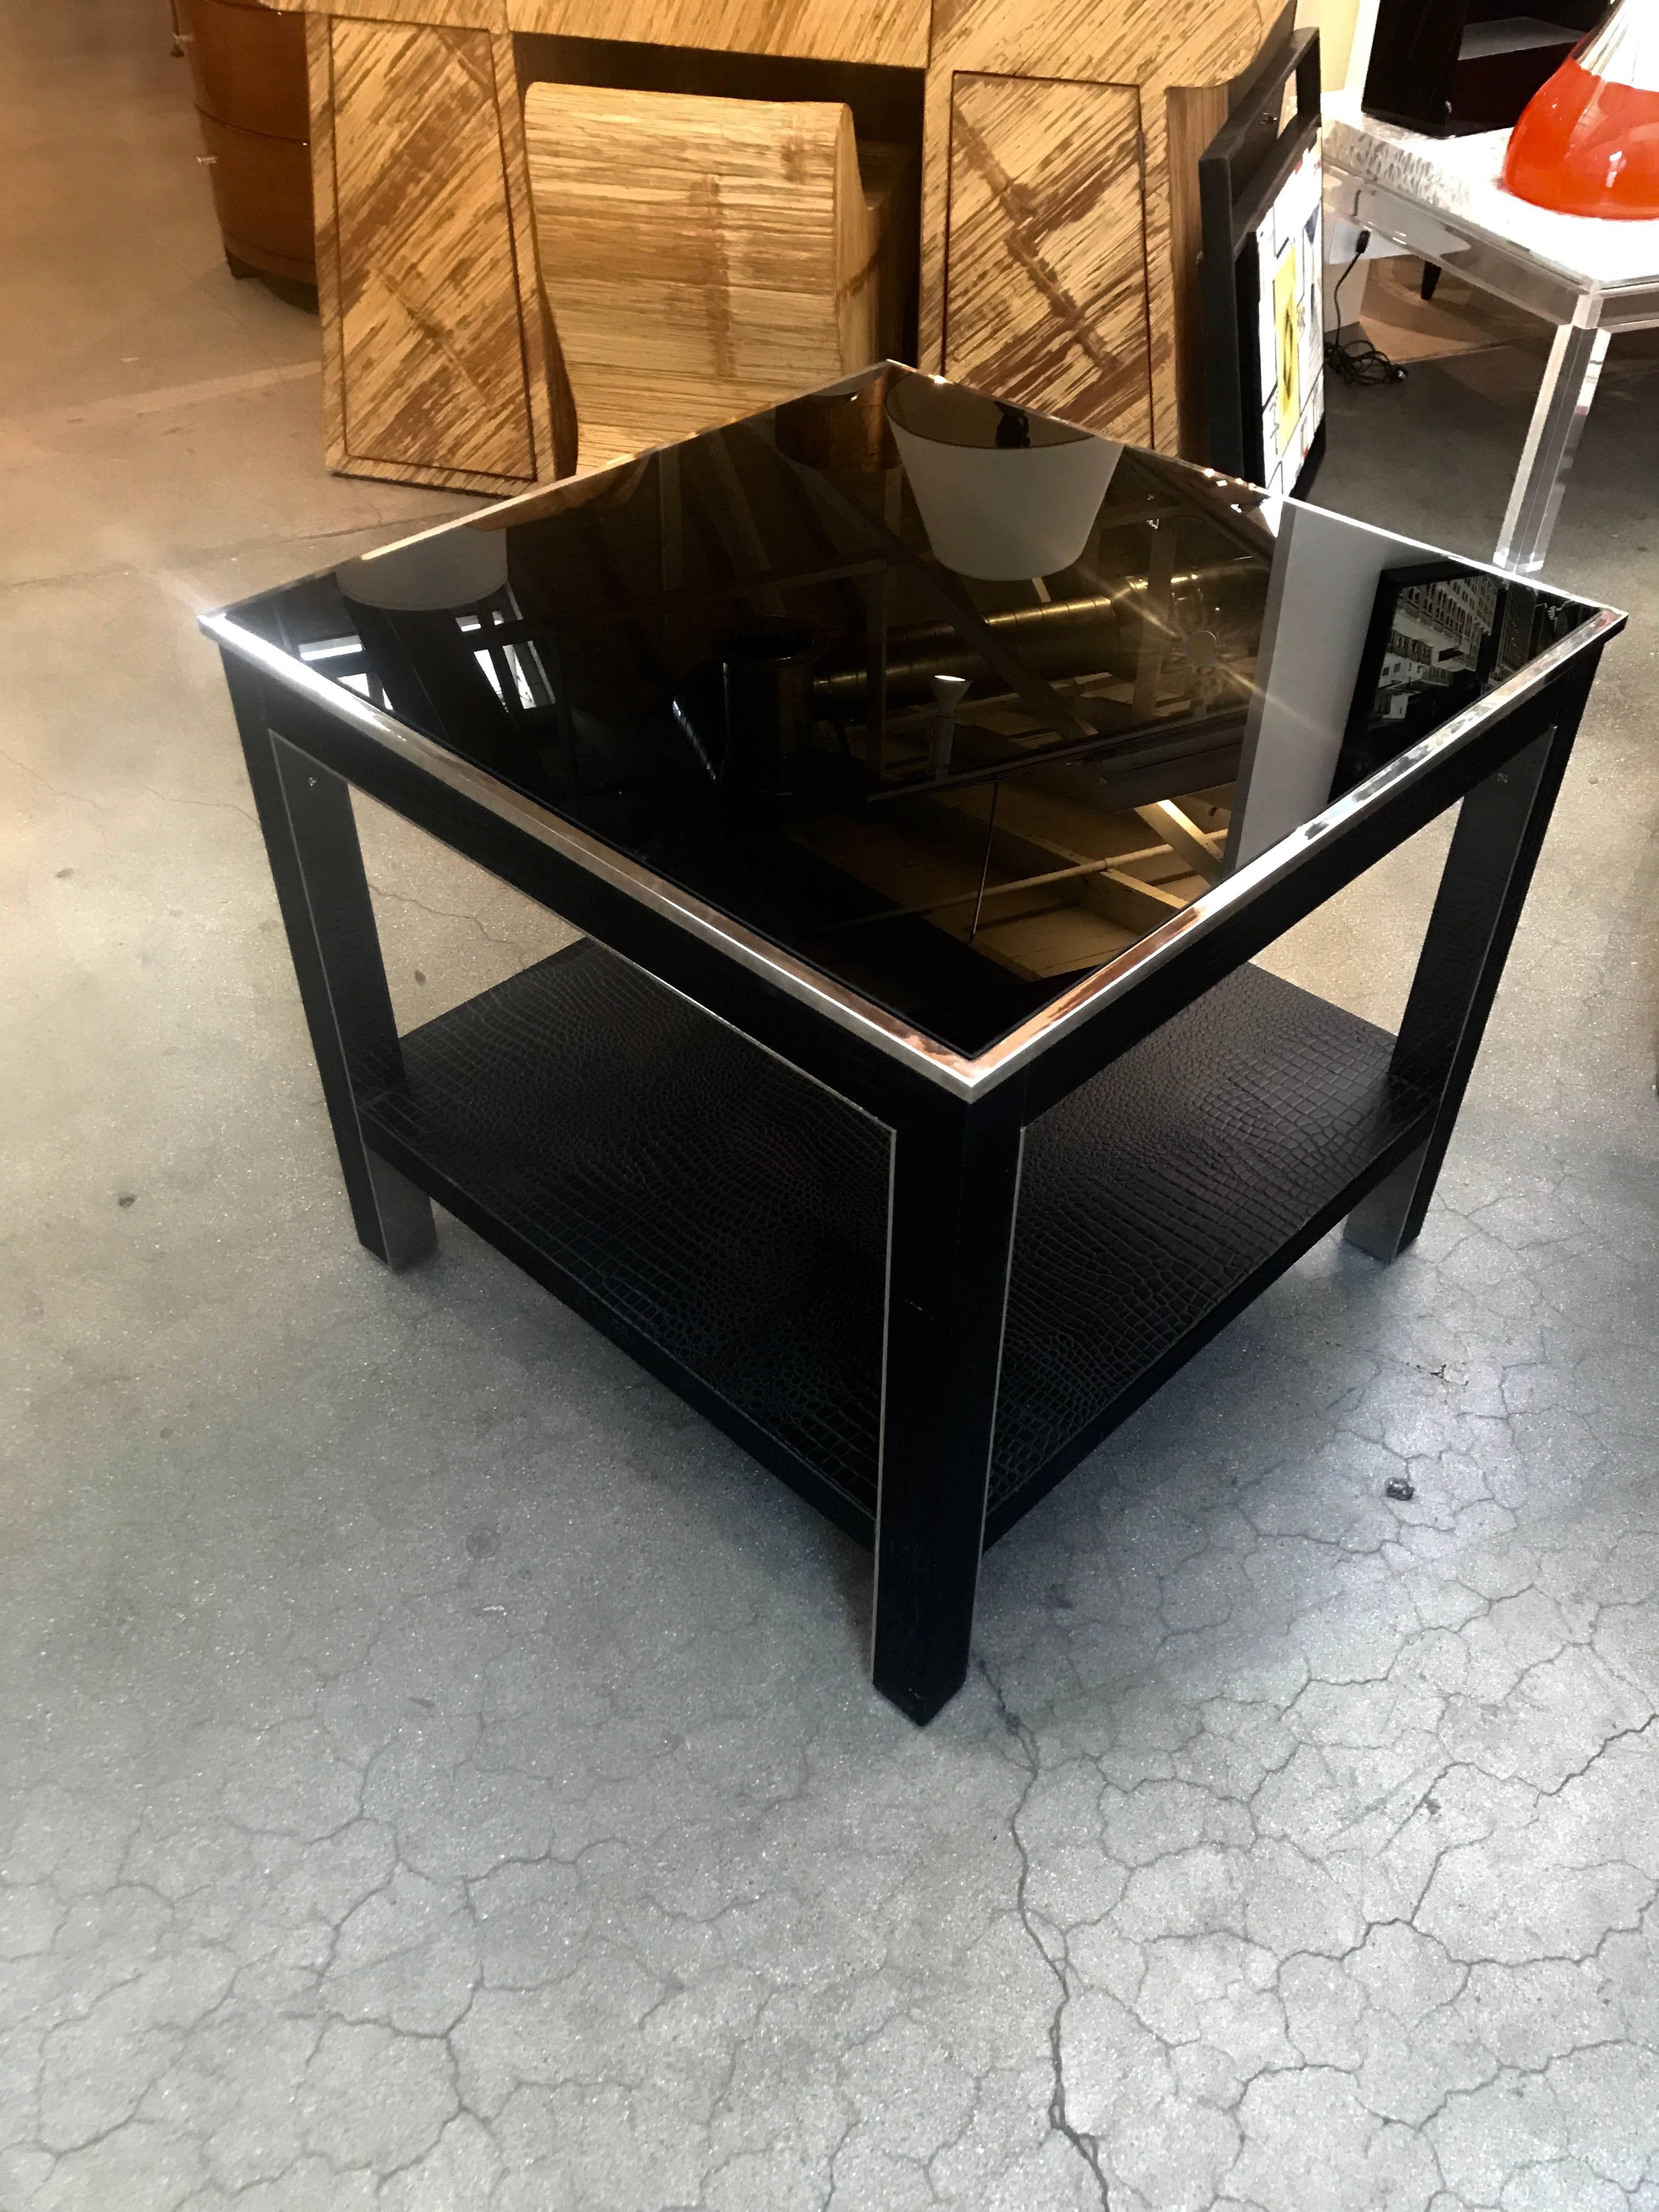 A very nice quality dark glass table with a faux crocodile leather or vinyl covering and steel insets. No labels but very high quality. The top glass piece is new. The original had cracked and we replaced it. There are some marks to the leather or